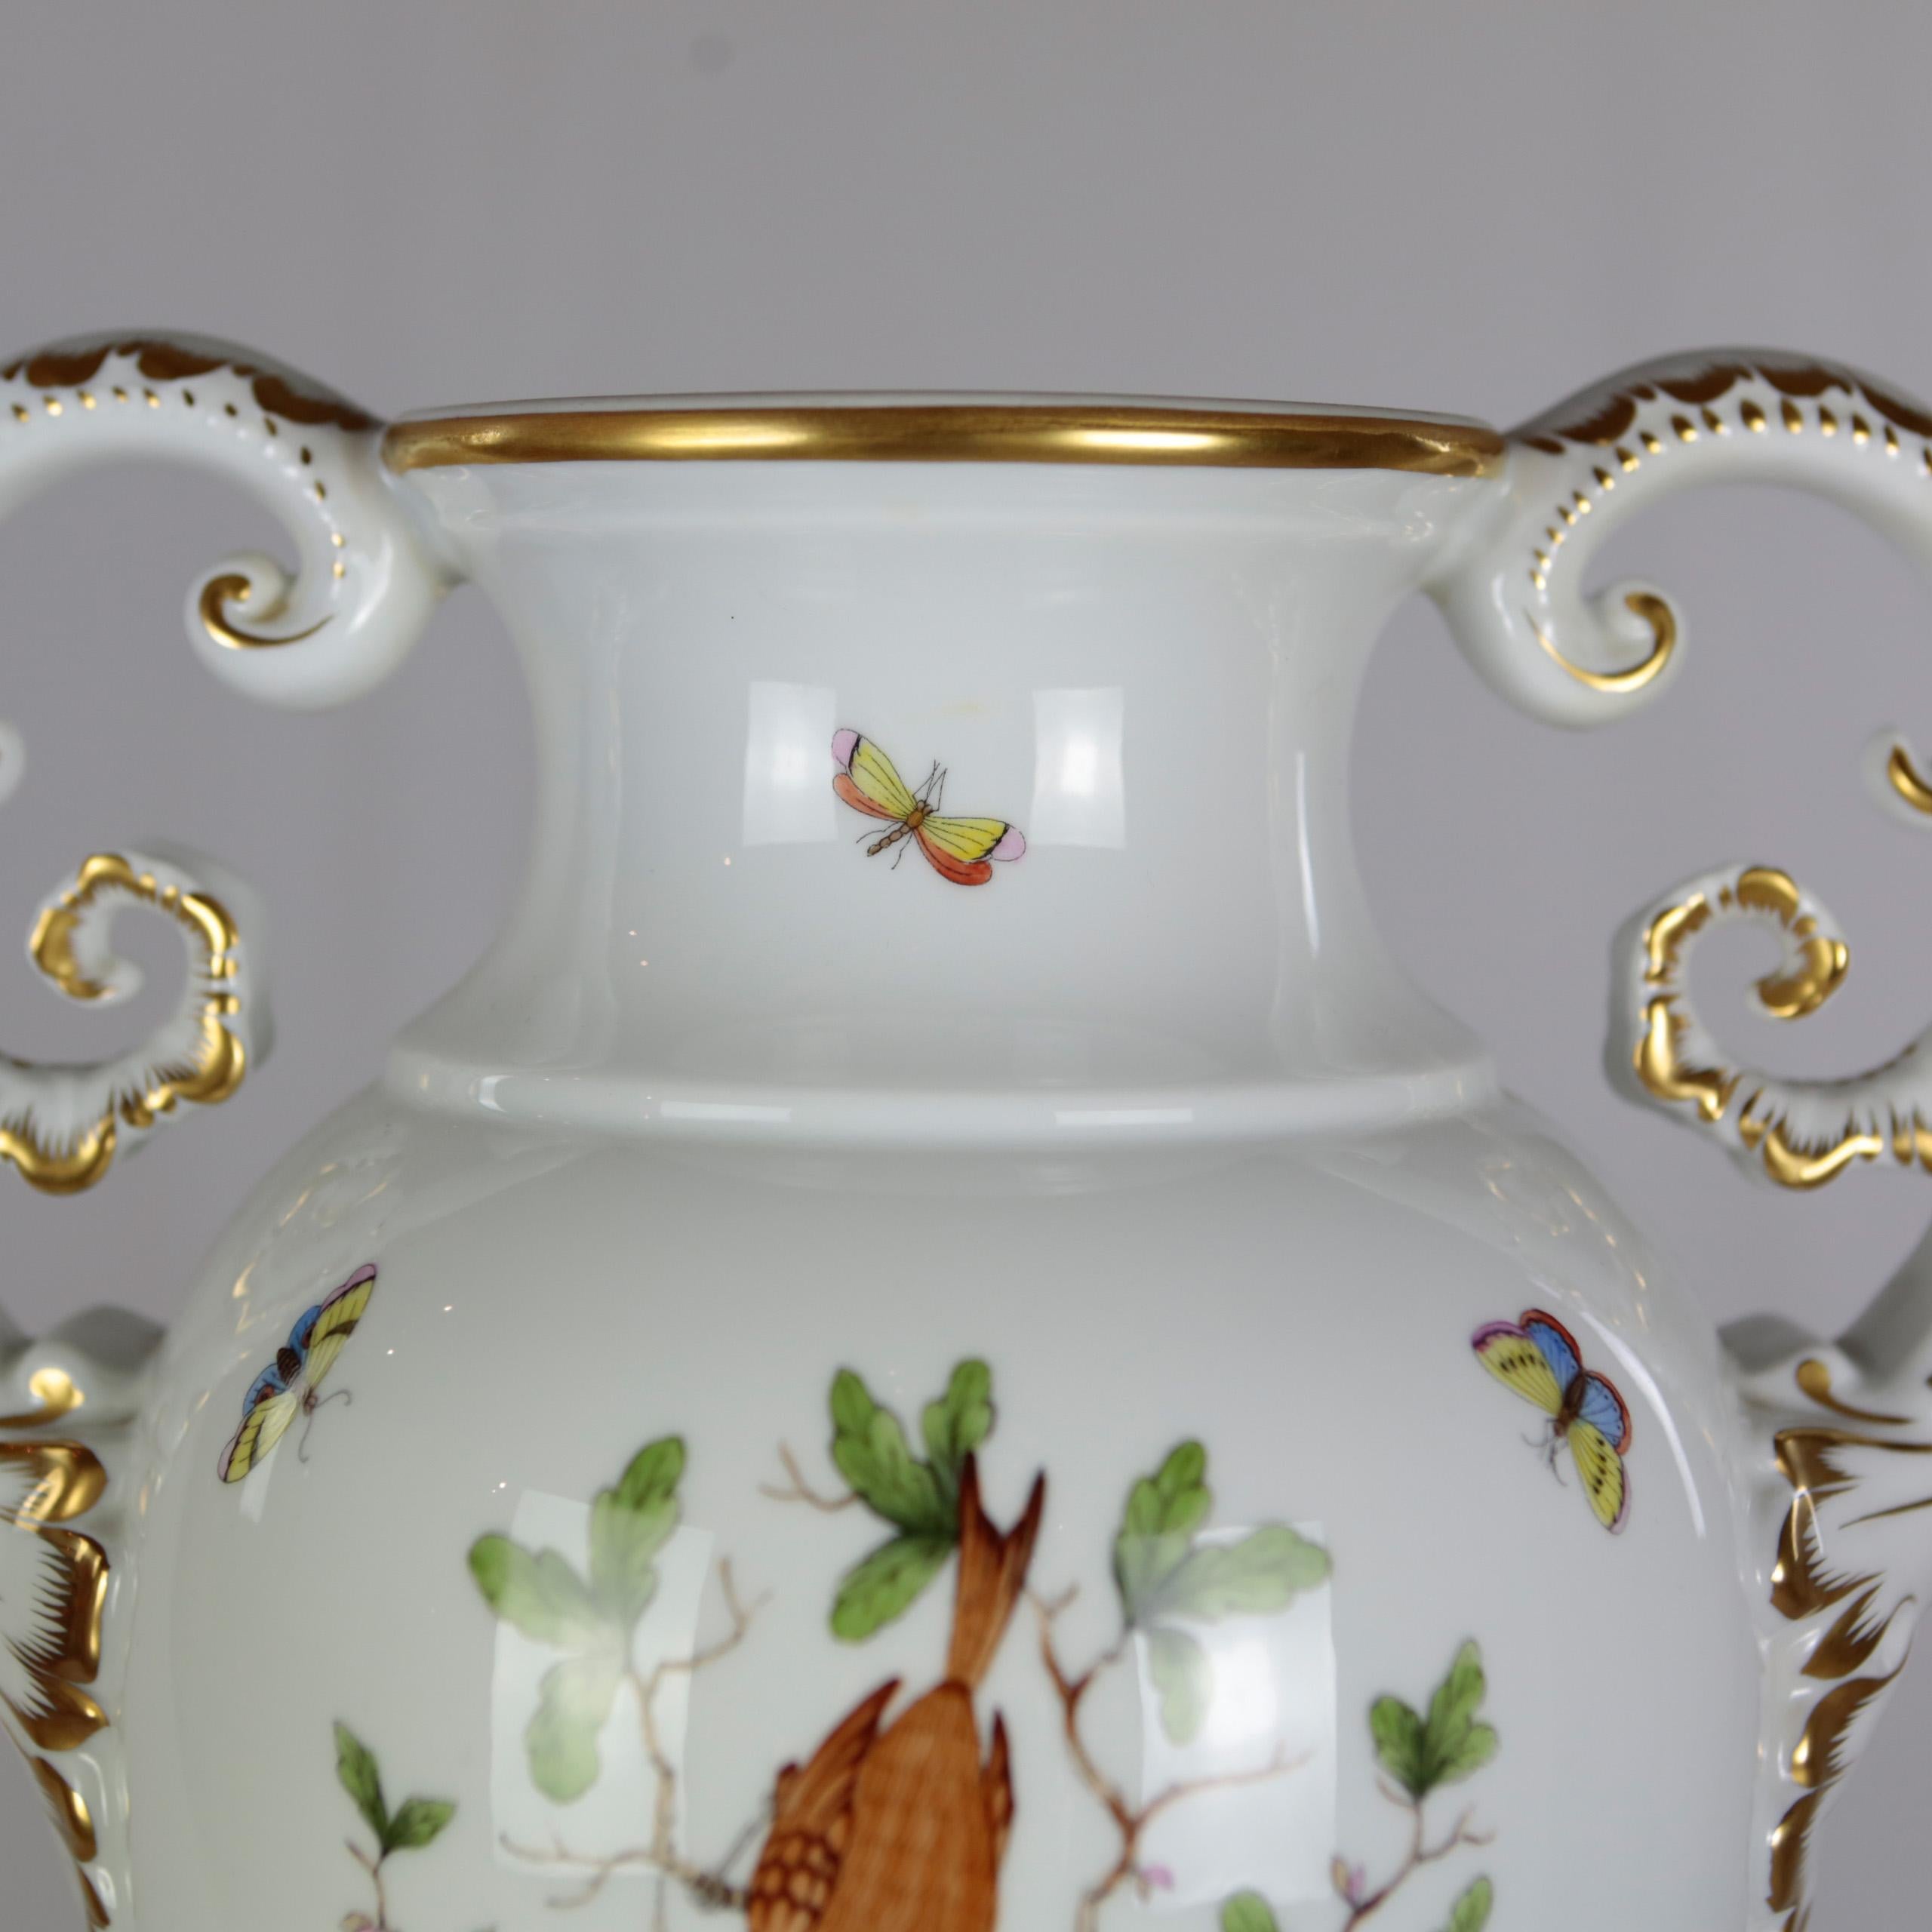 20th Century Herend Porcelain Amphora Vase, Rothschild Decor, Hand Painted, Gilded, Hungary For Sale